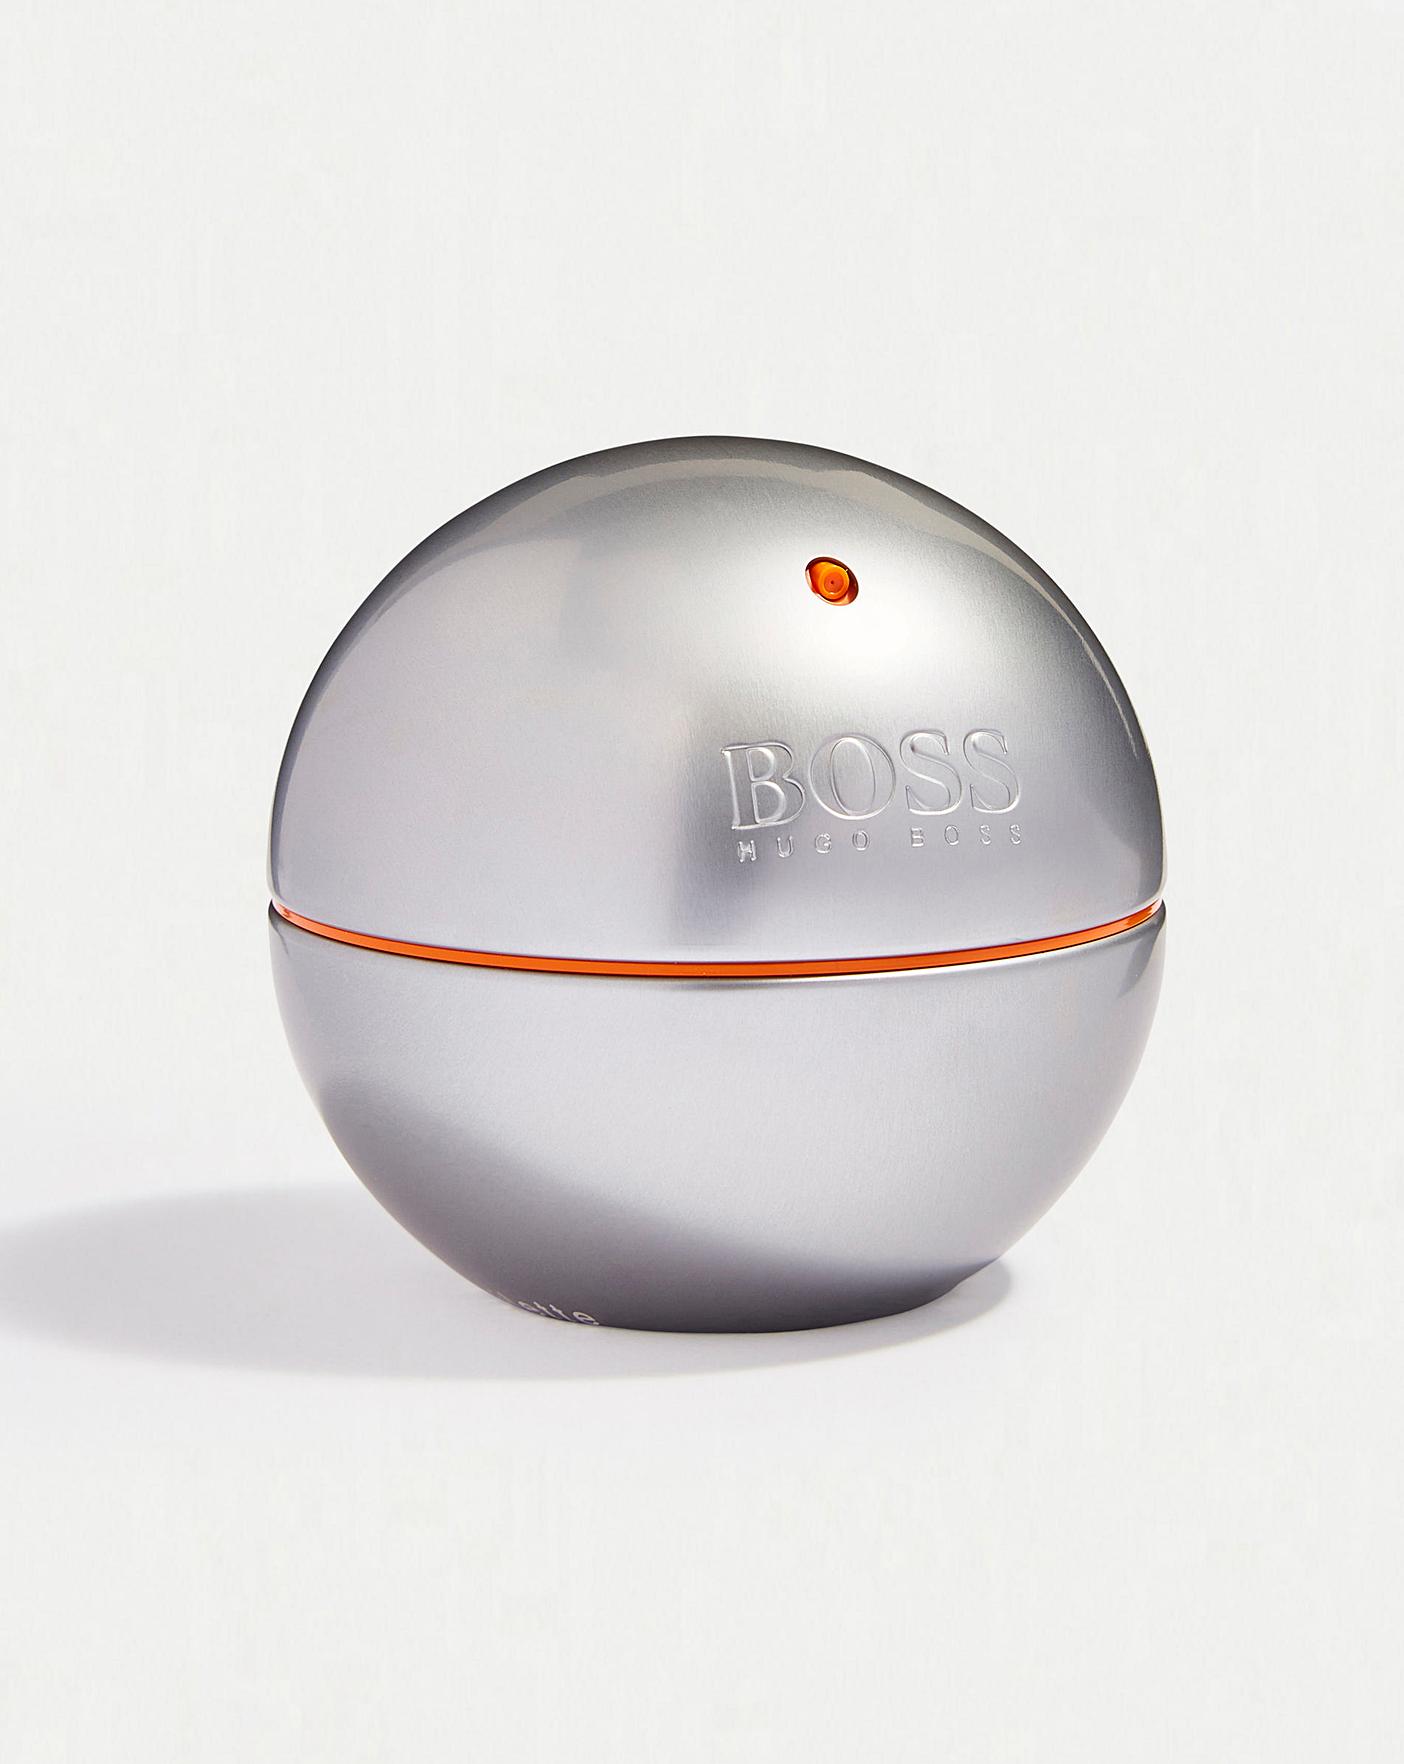 hugo boss ball aftershave